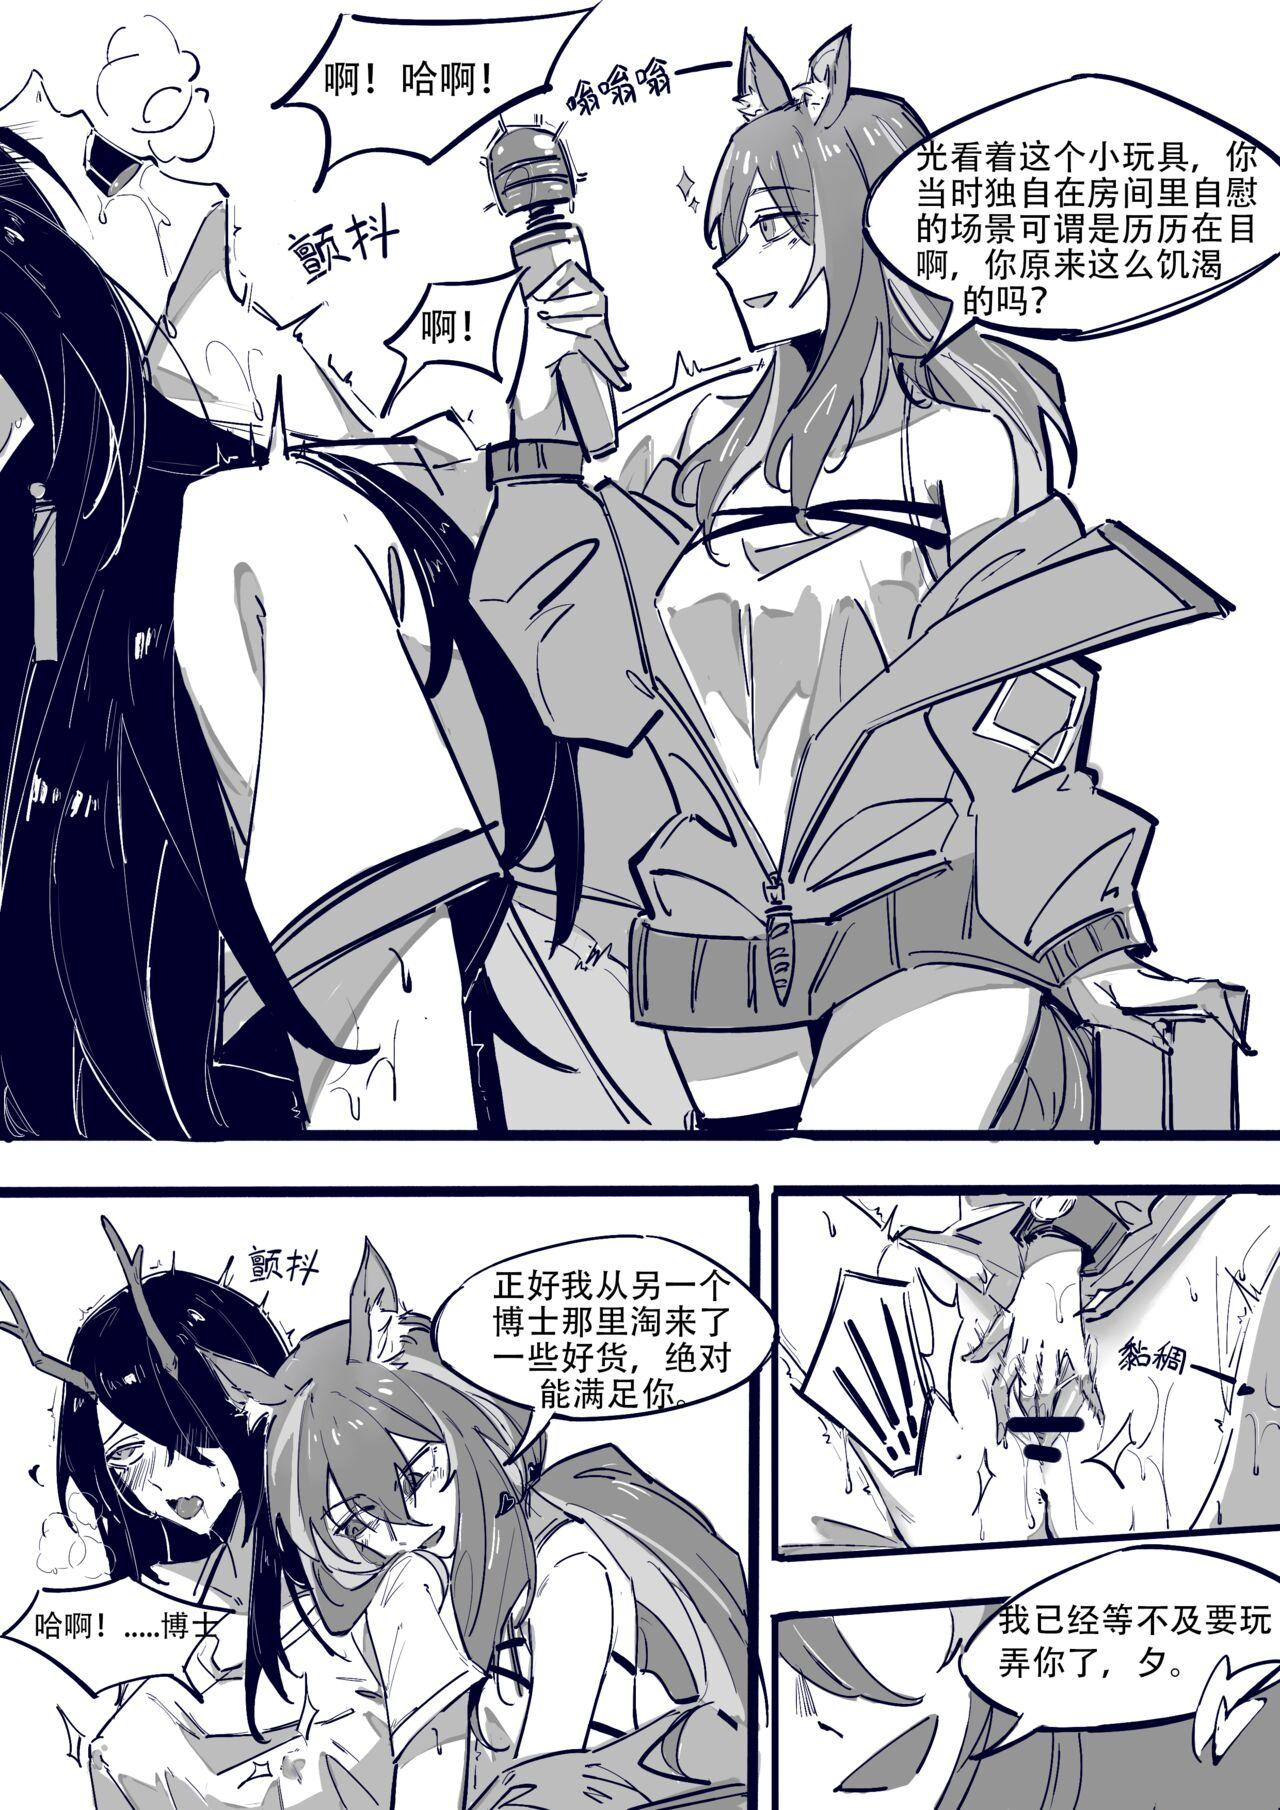 Vaginal 博士大战龙泡泡（明日方舟扶她H） - Arknights Real Couple - Page 5